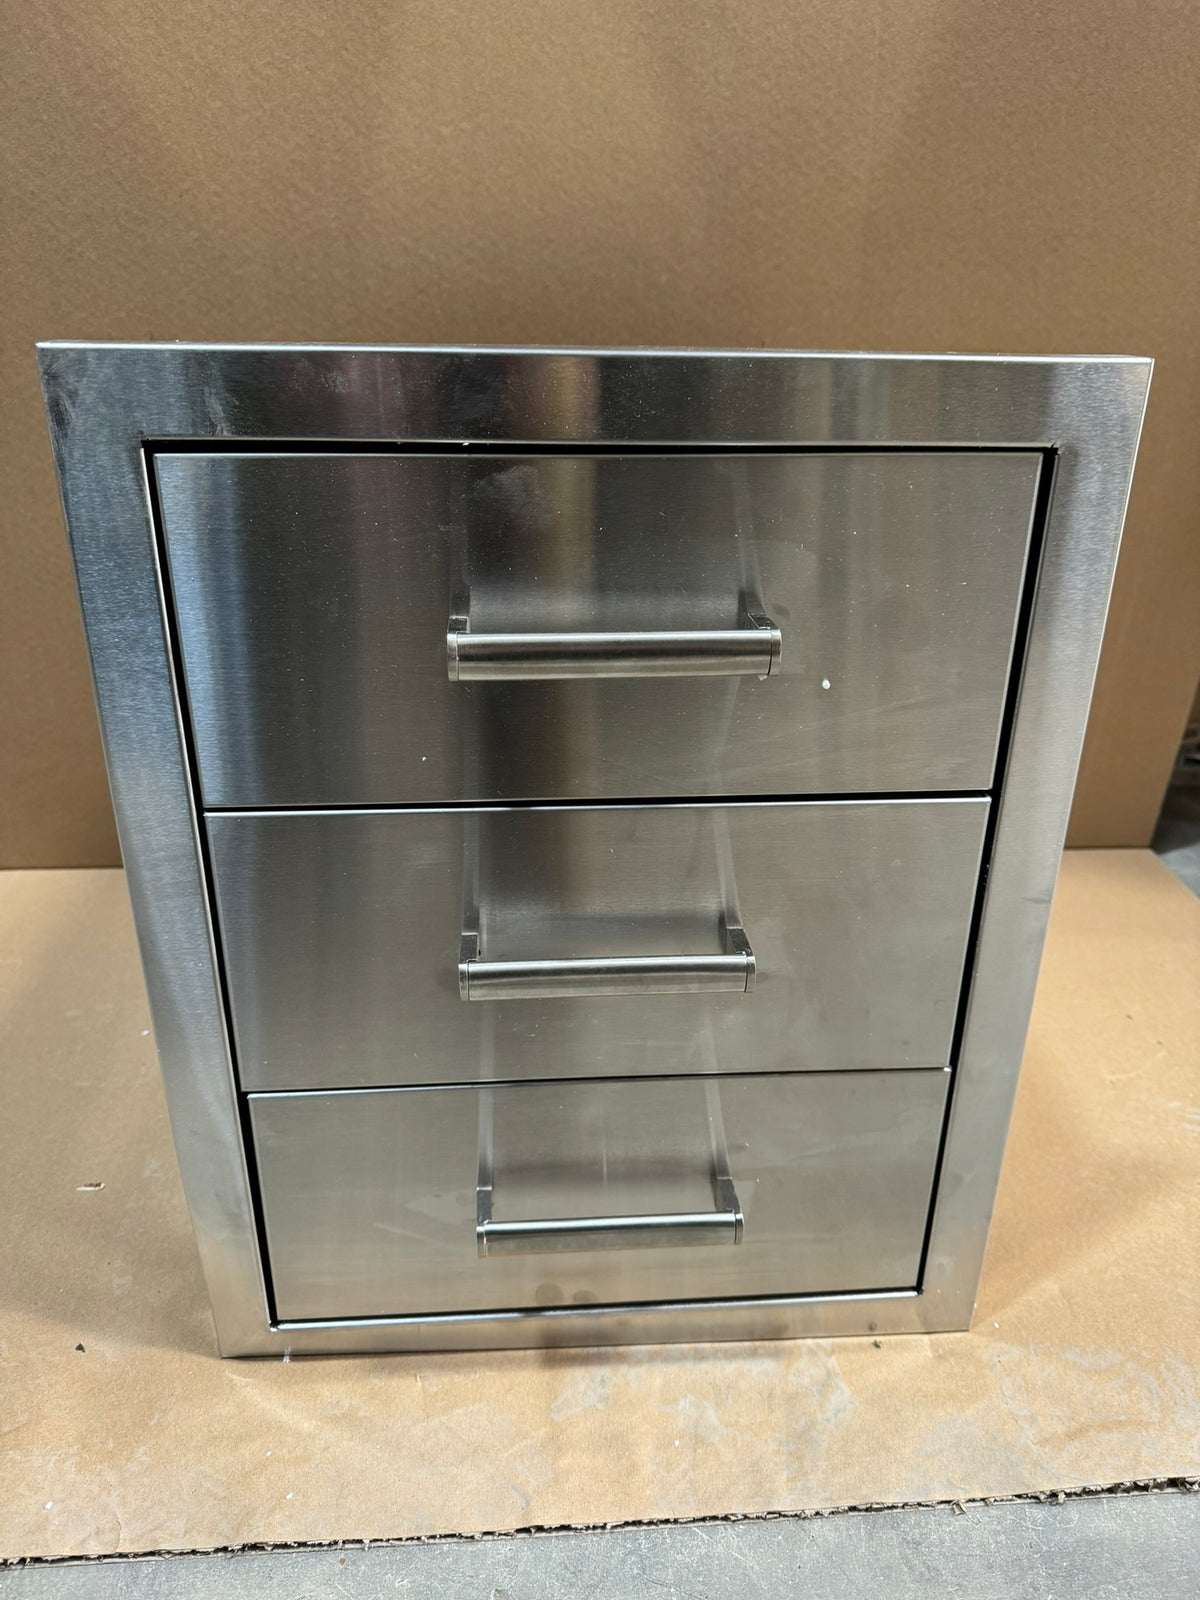 Draco Grills Stainless Steel Build-in Outdoor Kitchen Triple Drawer Unit ****Ex Display****